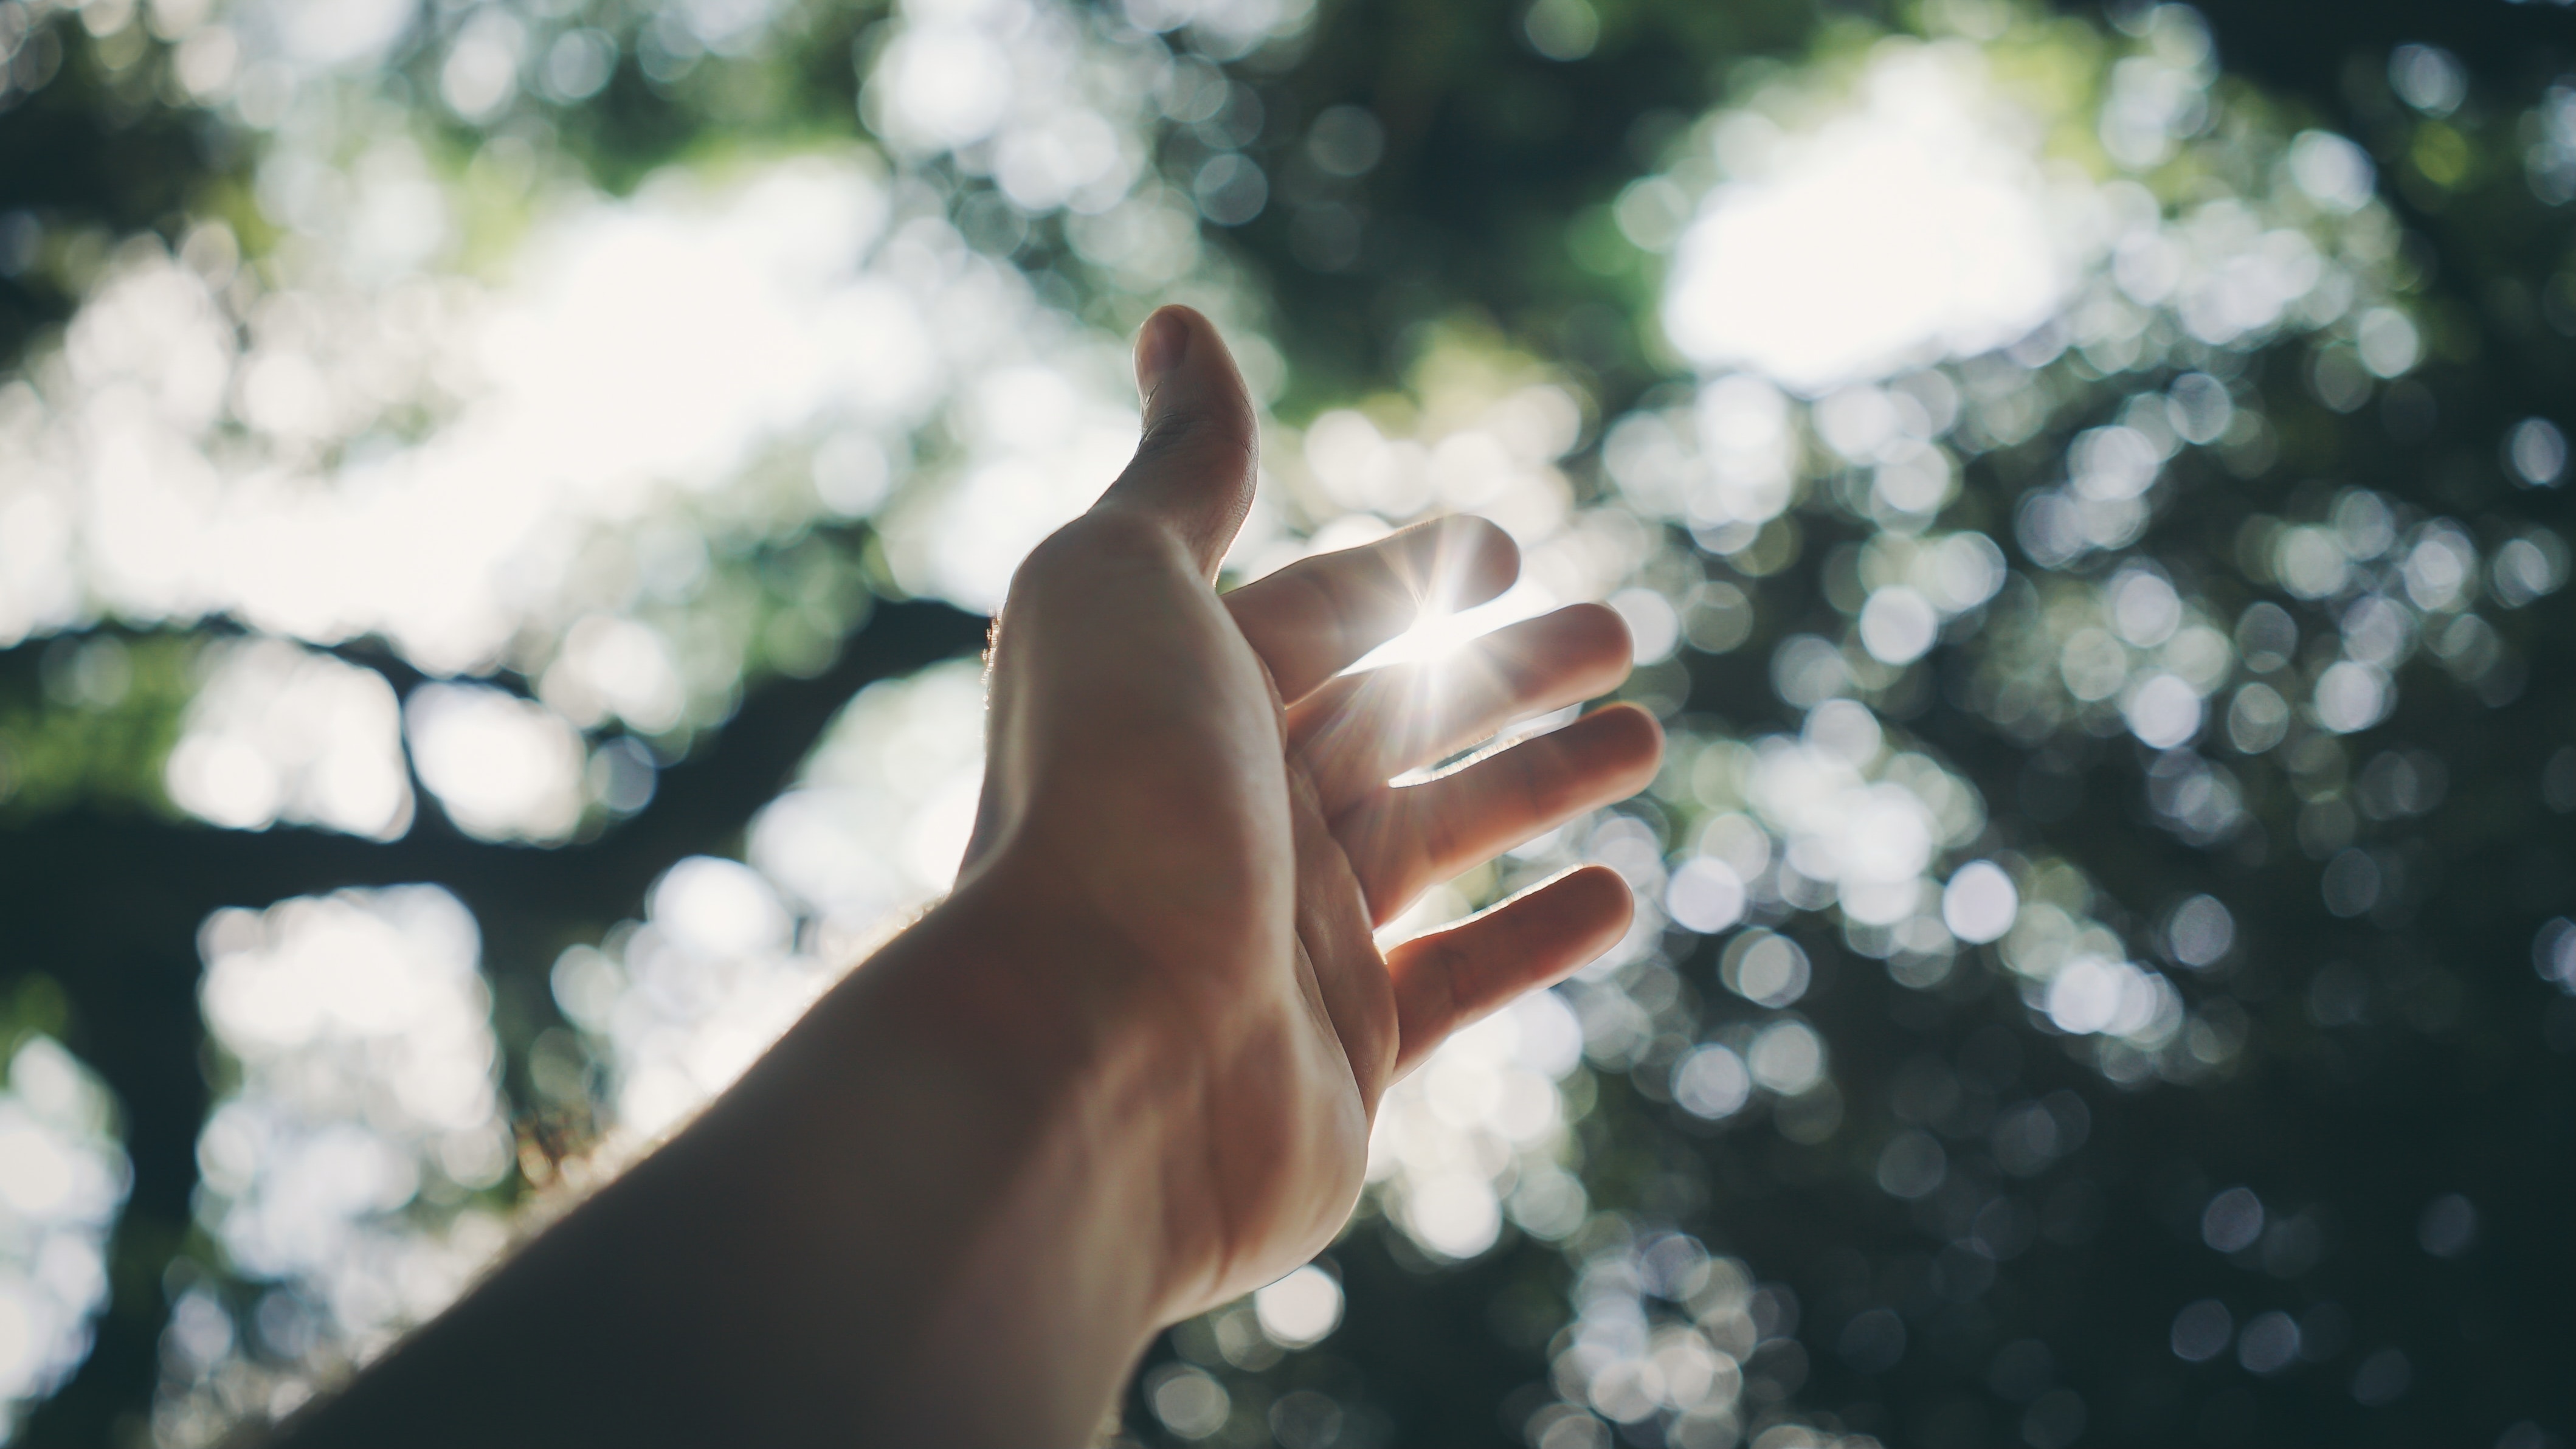 Selective Focus Photography Of Hand (photo by Ricardo Esquivel from Pexels)